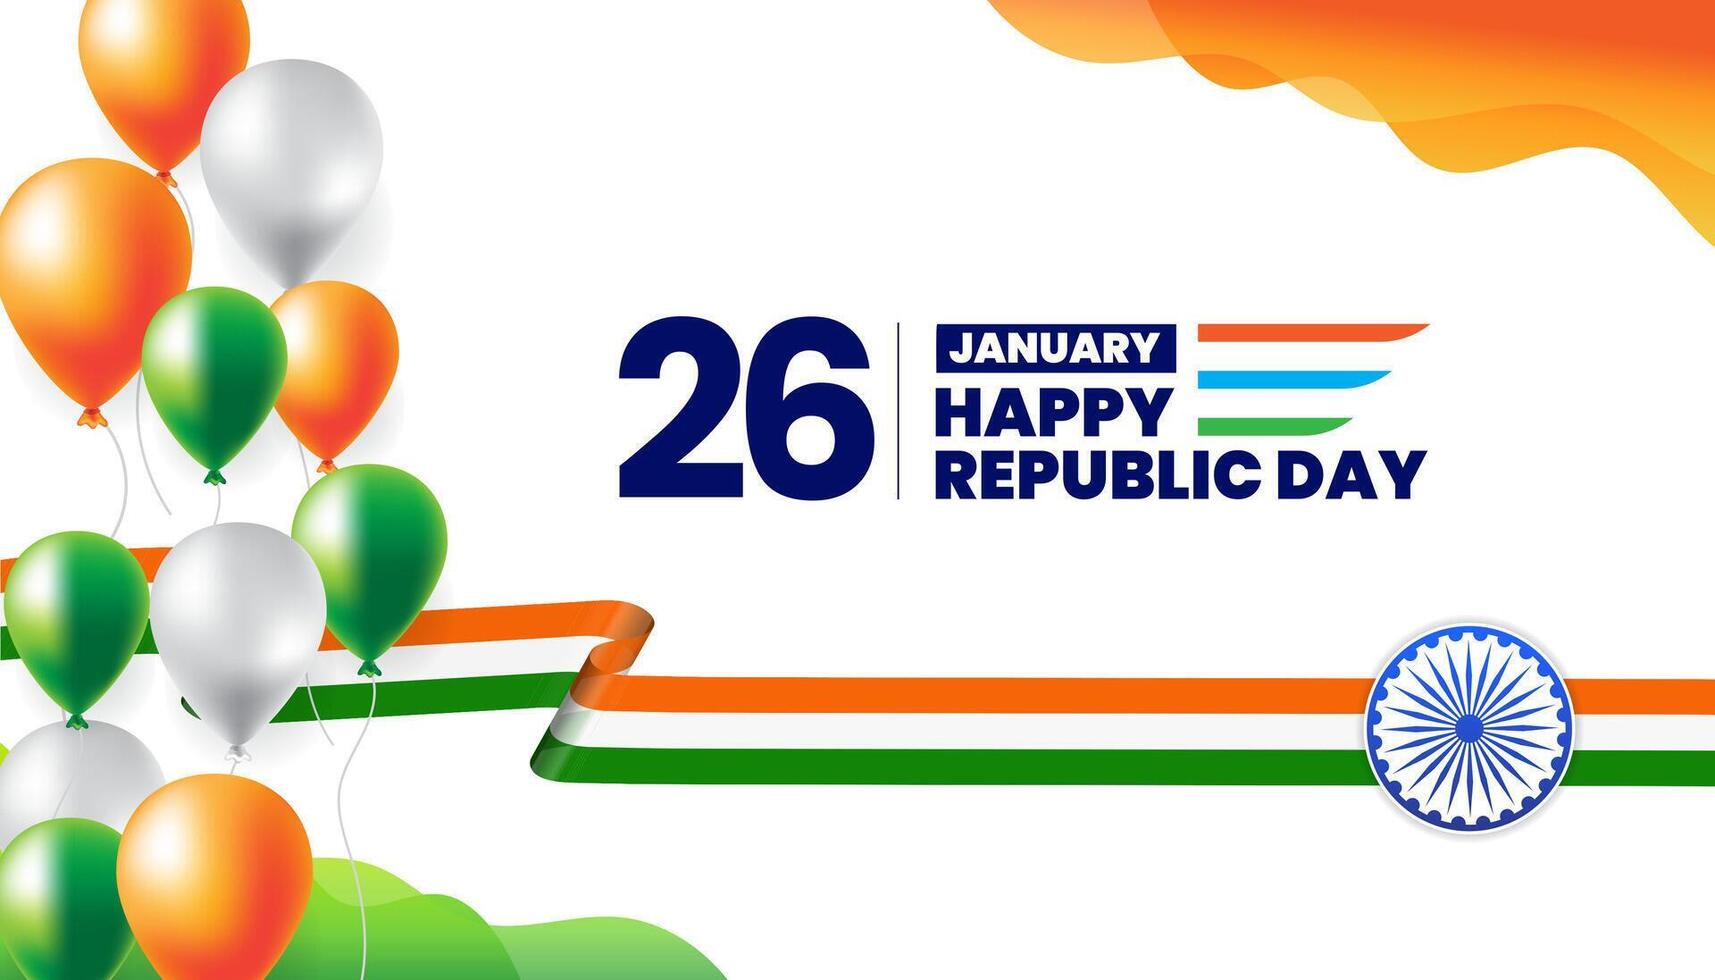 26 january republic day of india celebration with indian flag and balloons vector